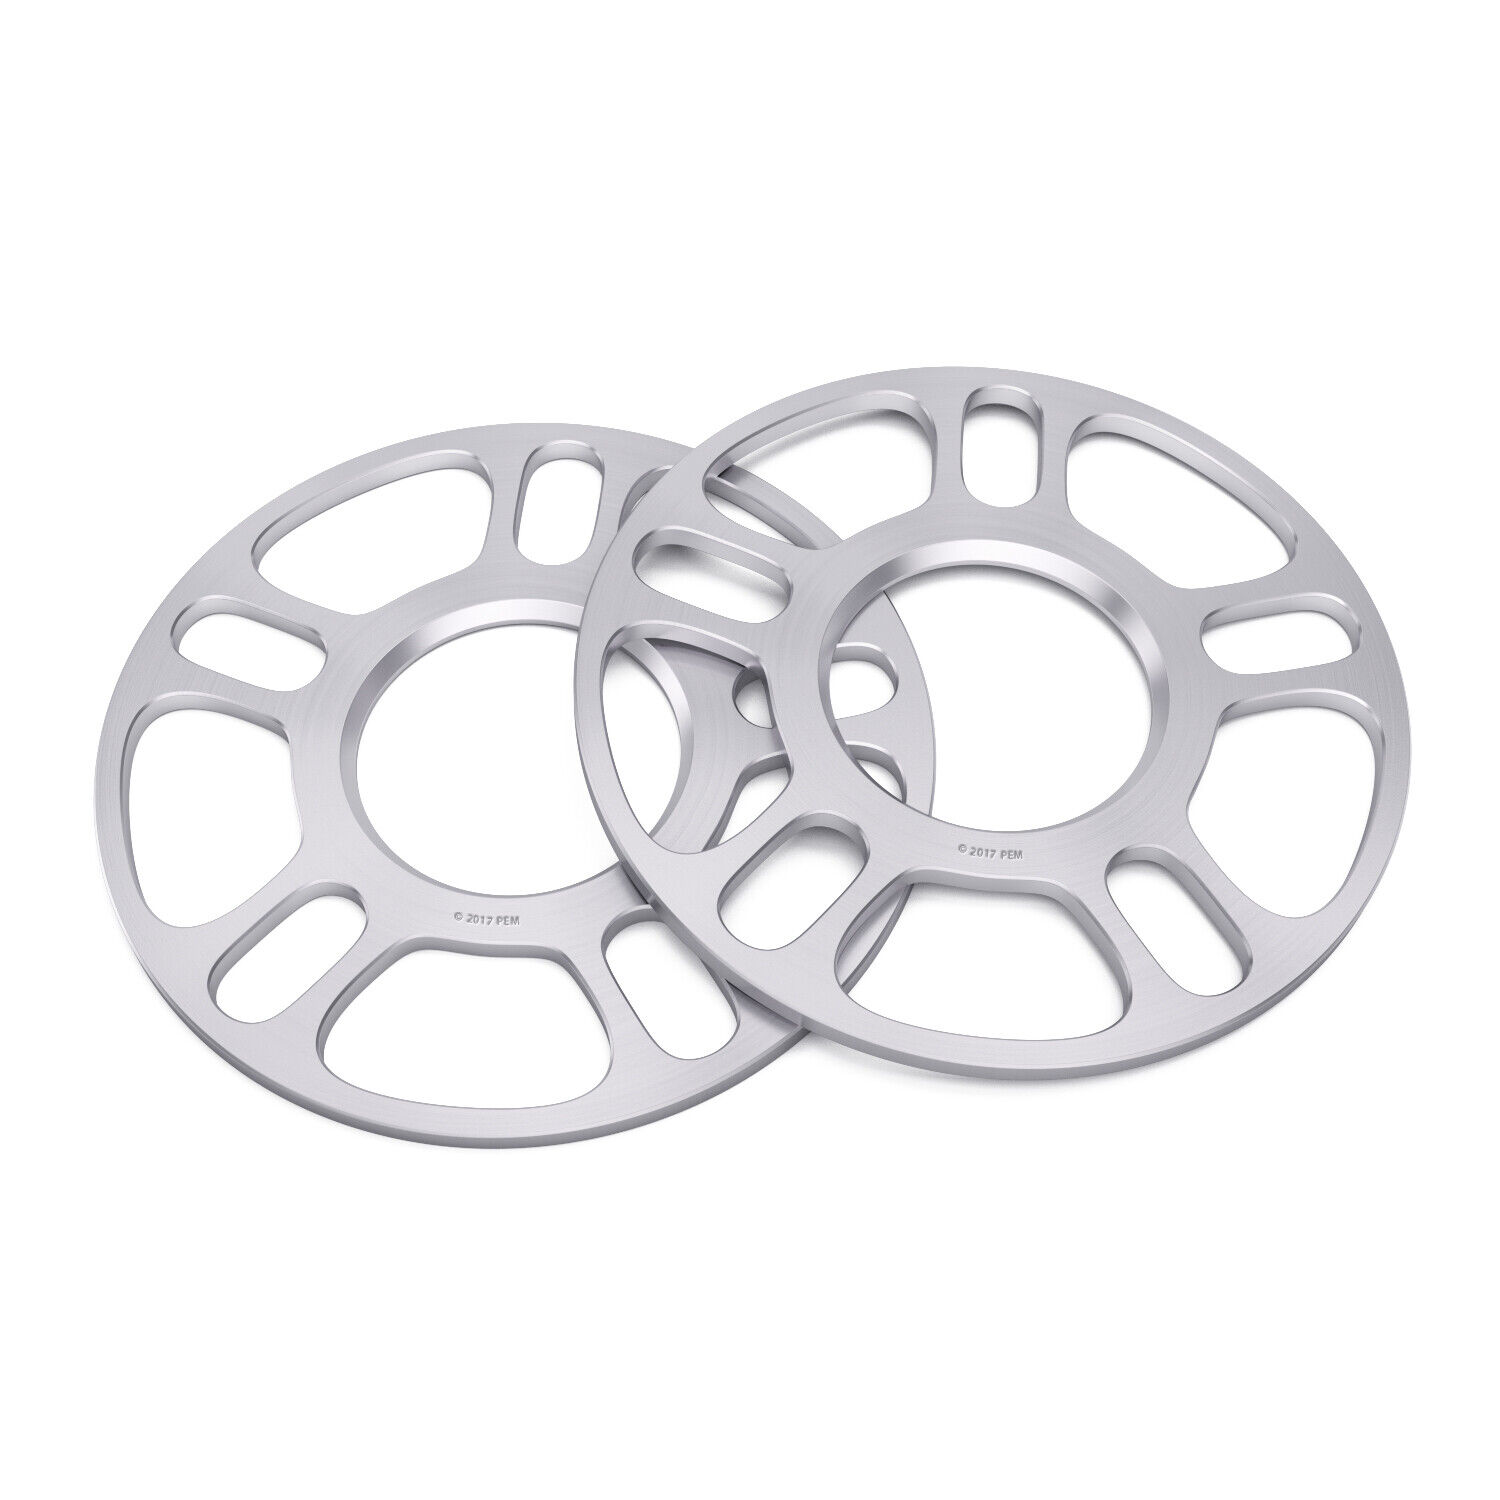 5mm Hubcentric 5x100 5x112 Race Wheel Spacers (57.1 hub) Audi A3 A4 S4 A6 S6 A8